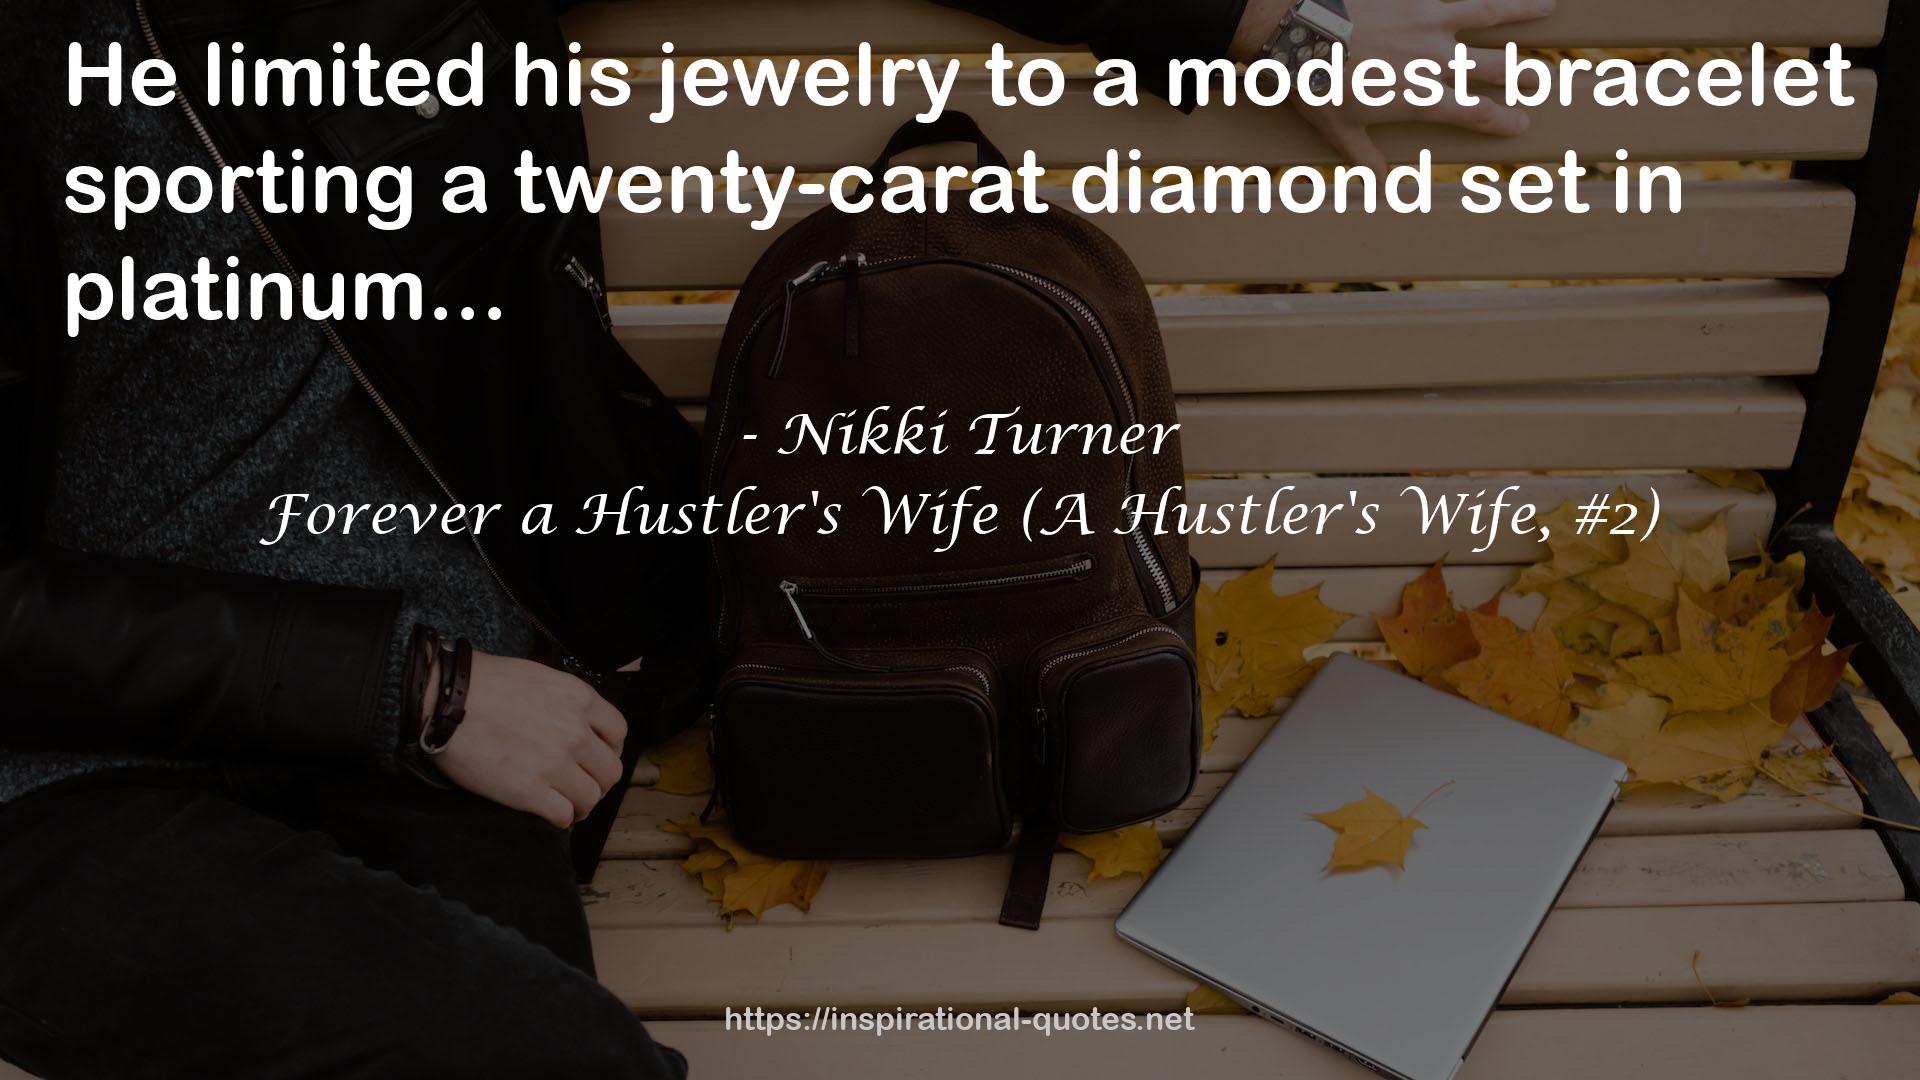 Forever a Hustler's Wife (A Hustler's Wife, #2) QUOTES